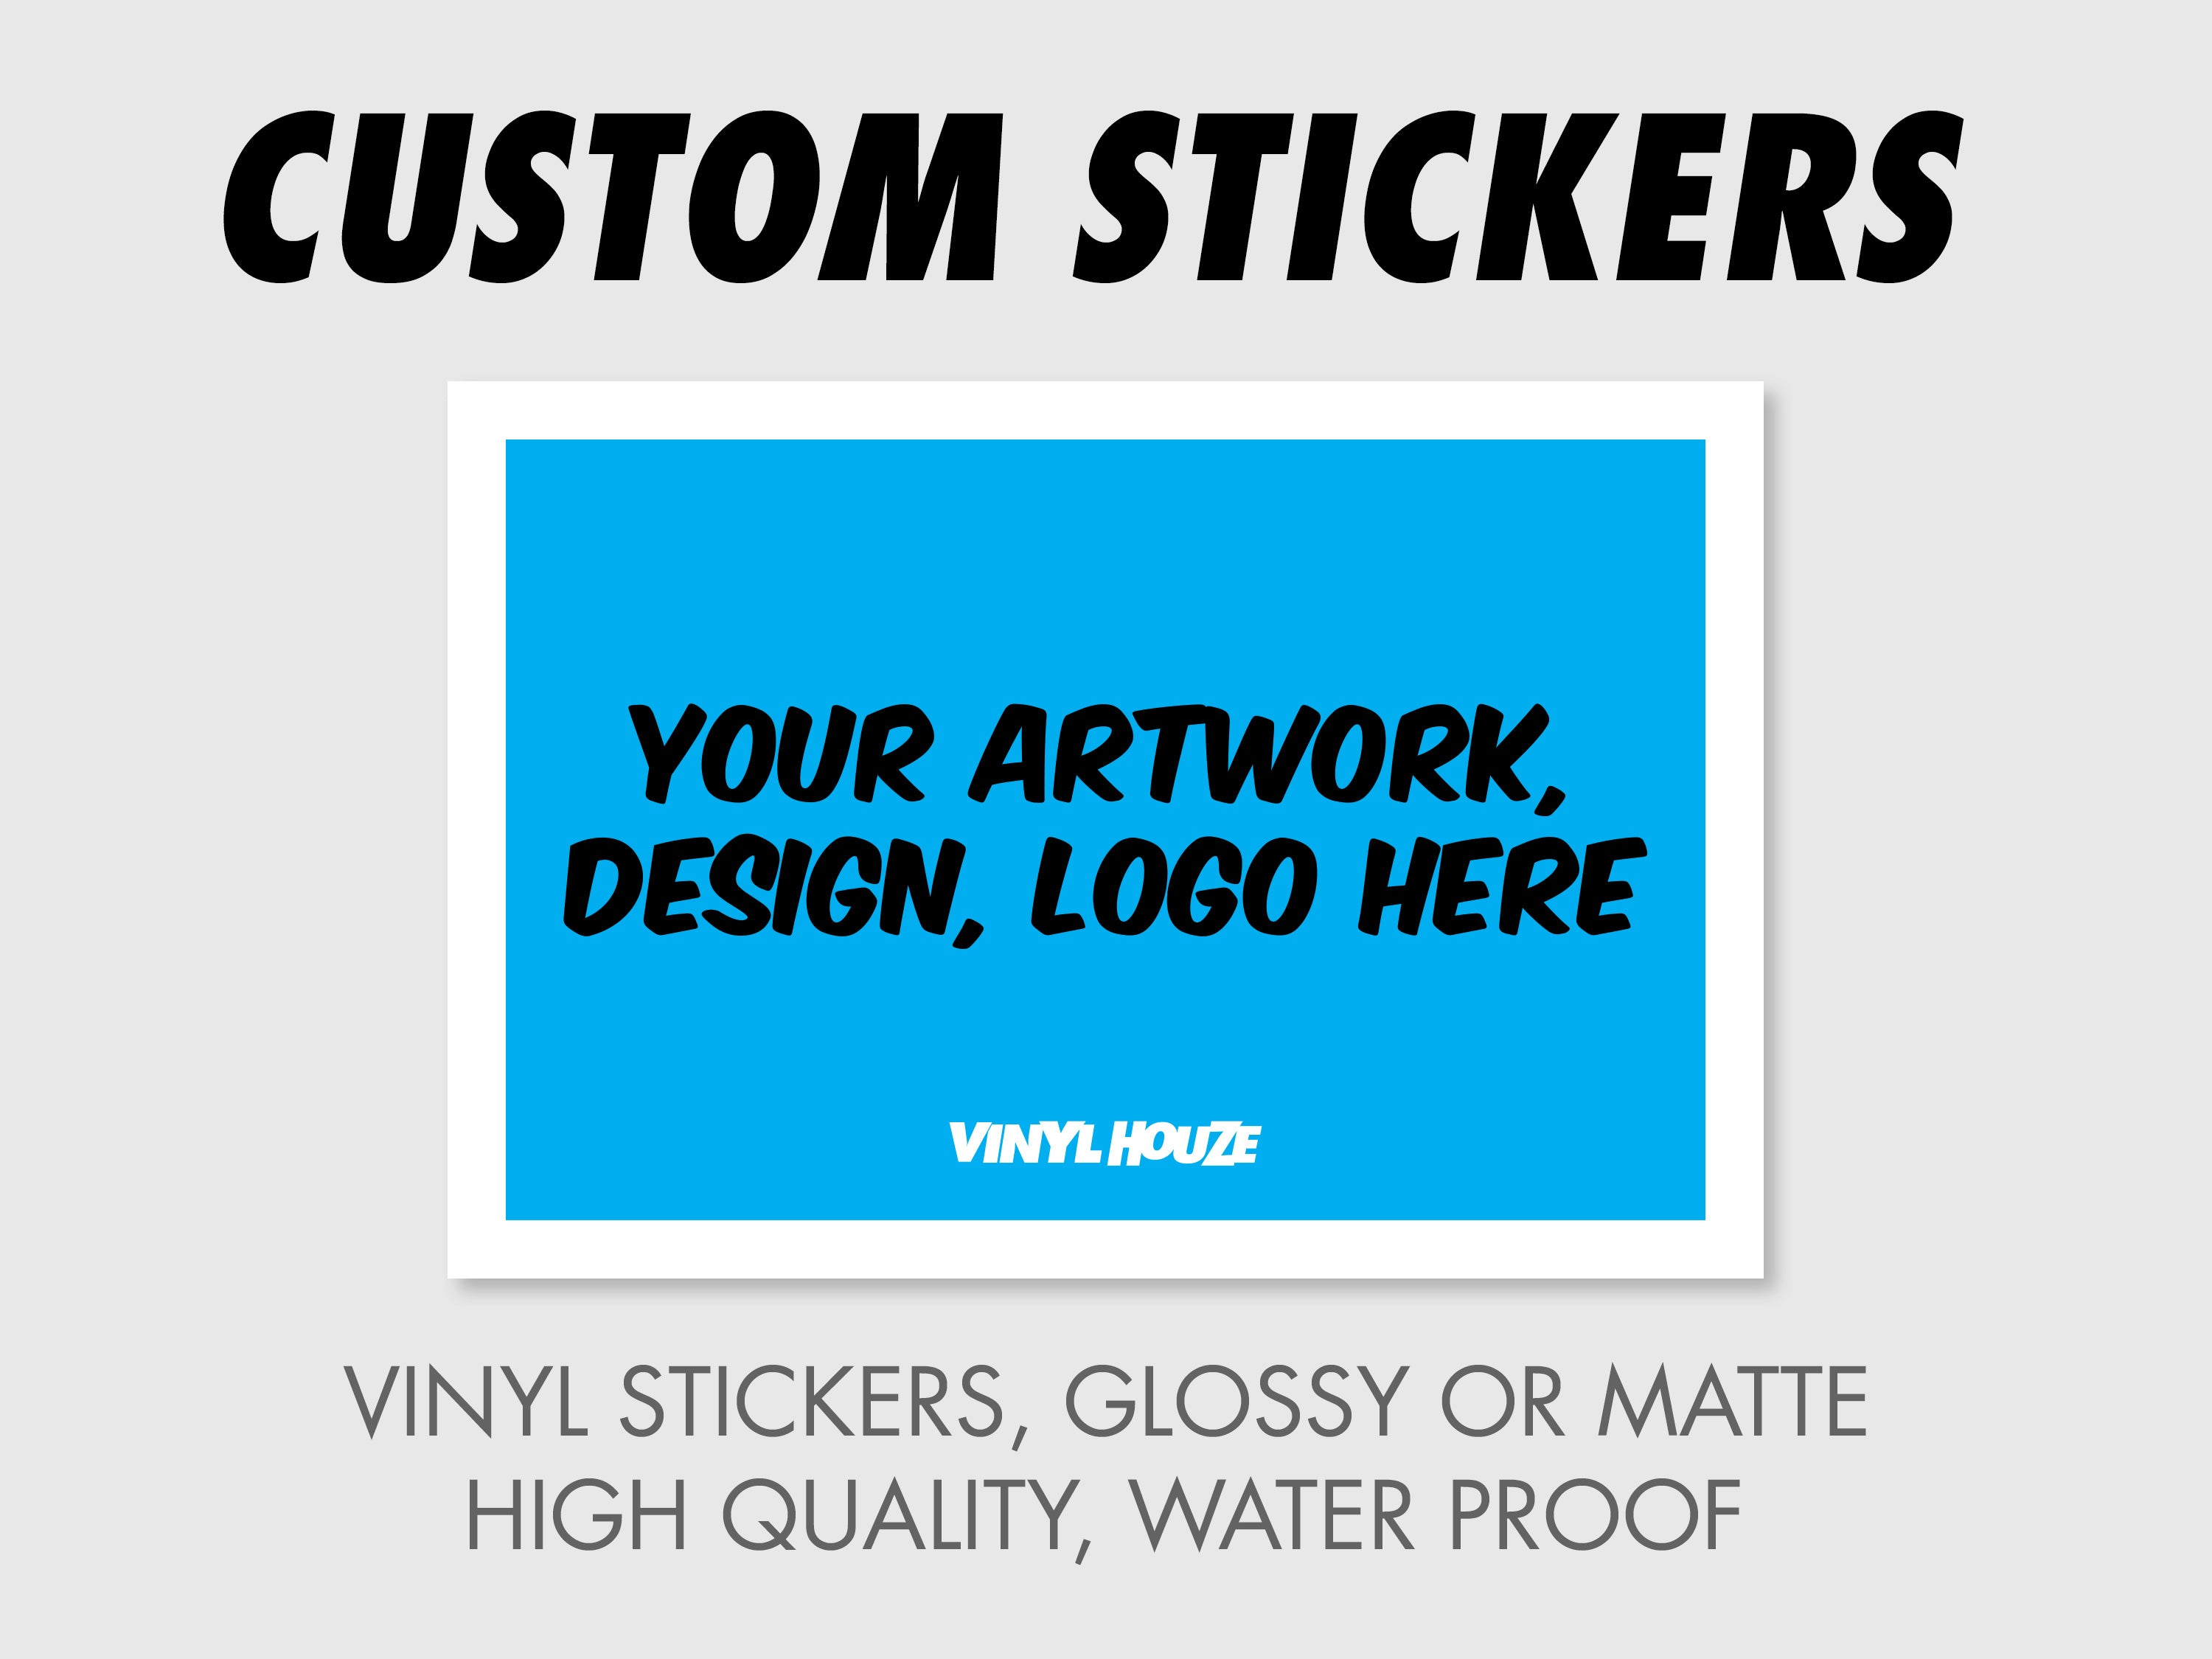 50 Personalized Rectangle Stickers